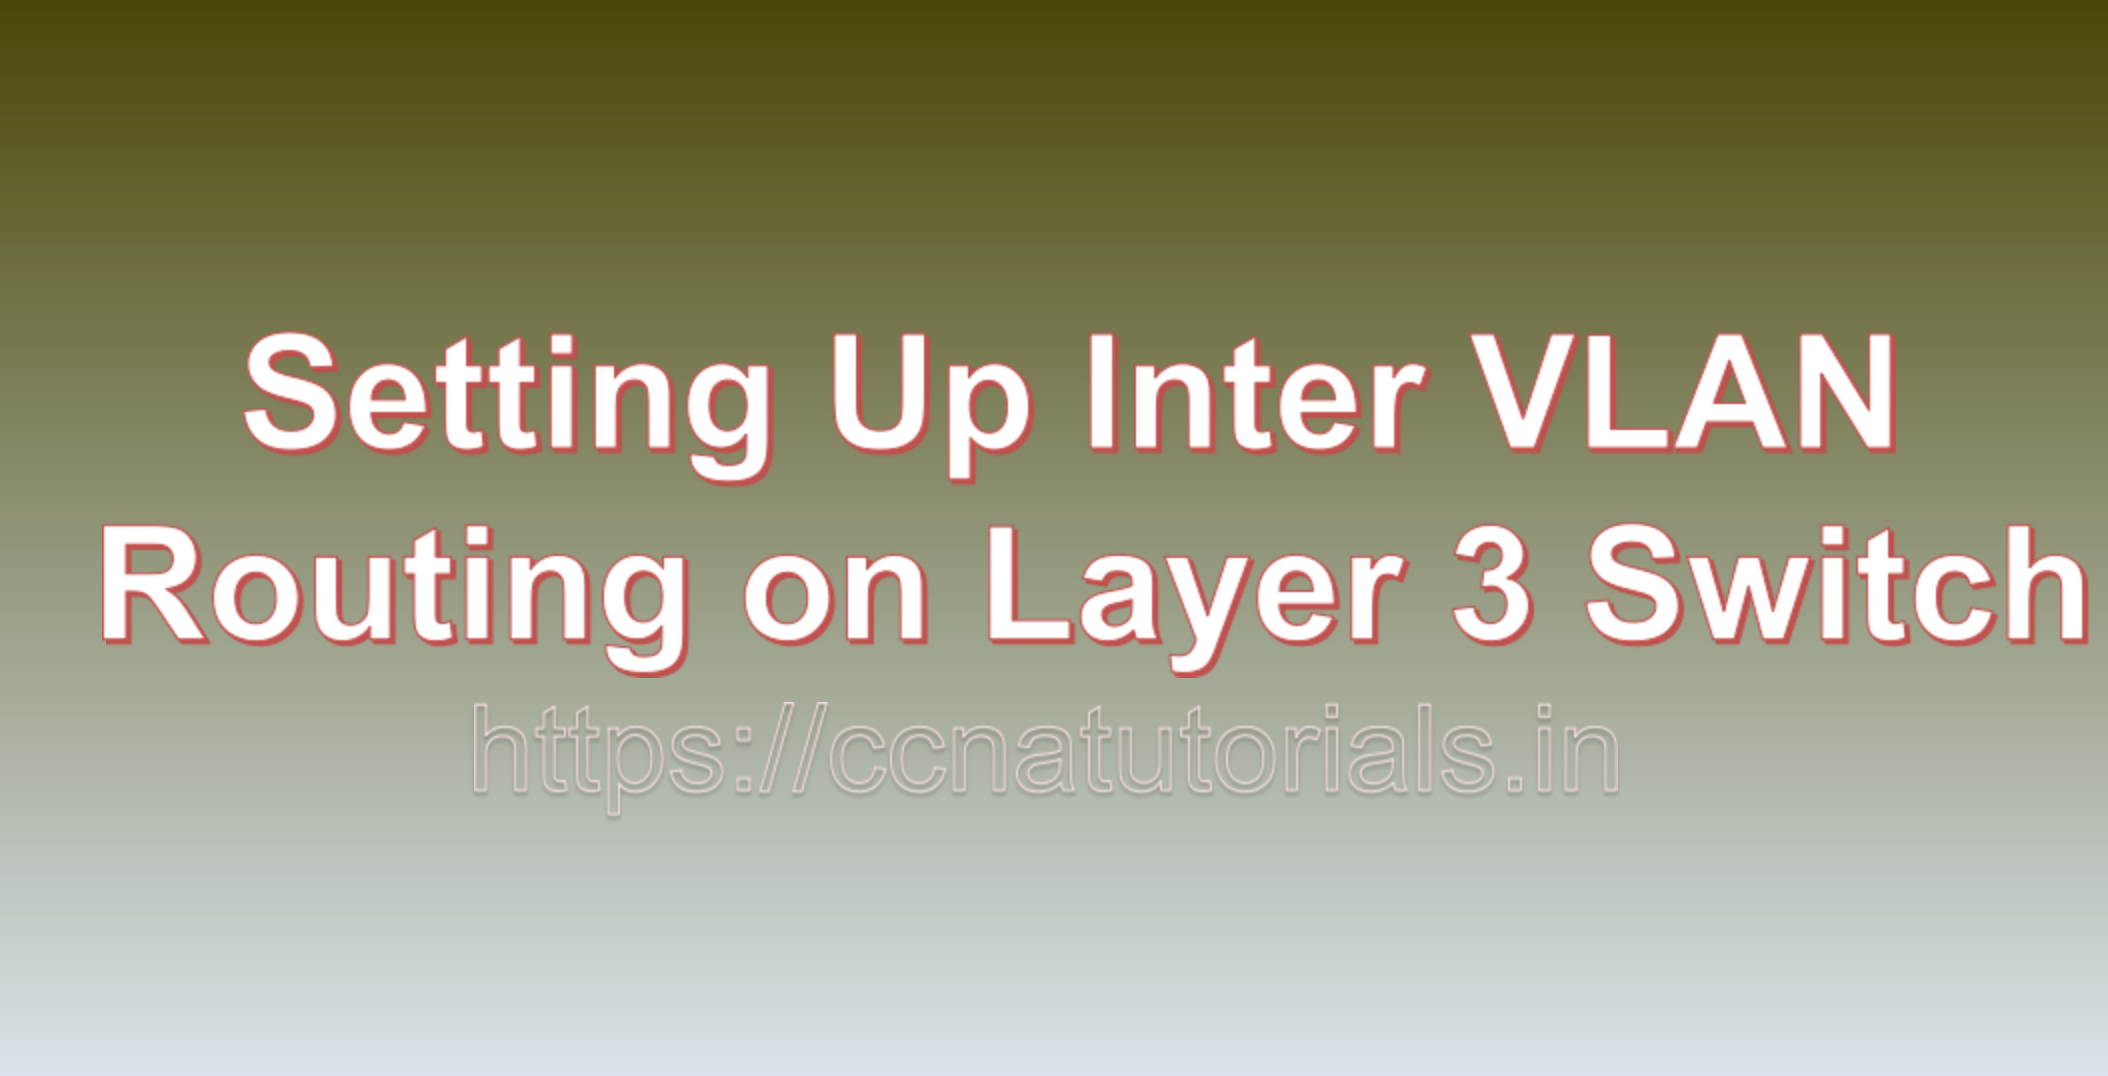 Setting Up Inter VLAN Routing on a Layer 3 Switch, ccna, ccna tutorials